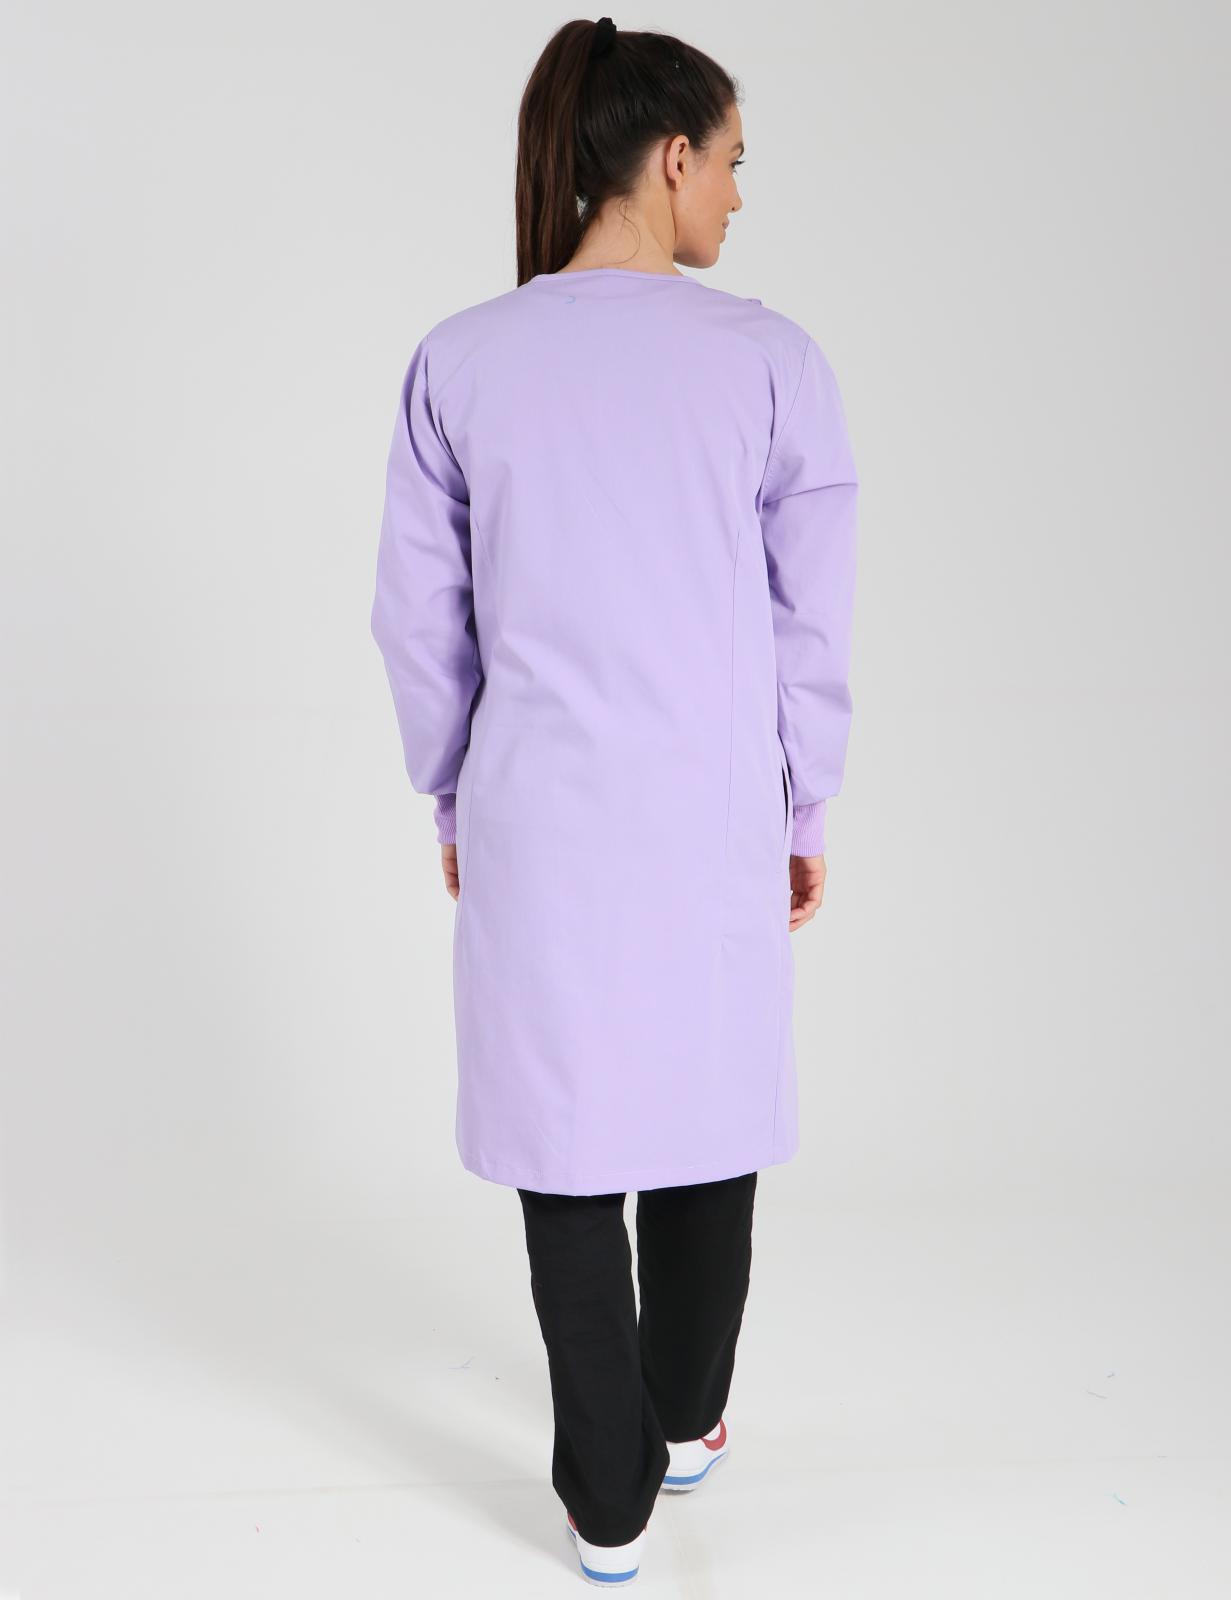 Side Opening Lab Coat - Lilac - 4X Large - 2